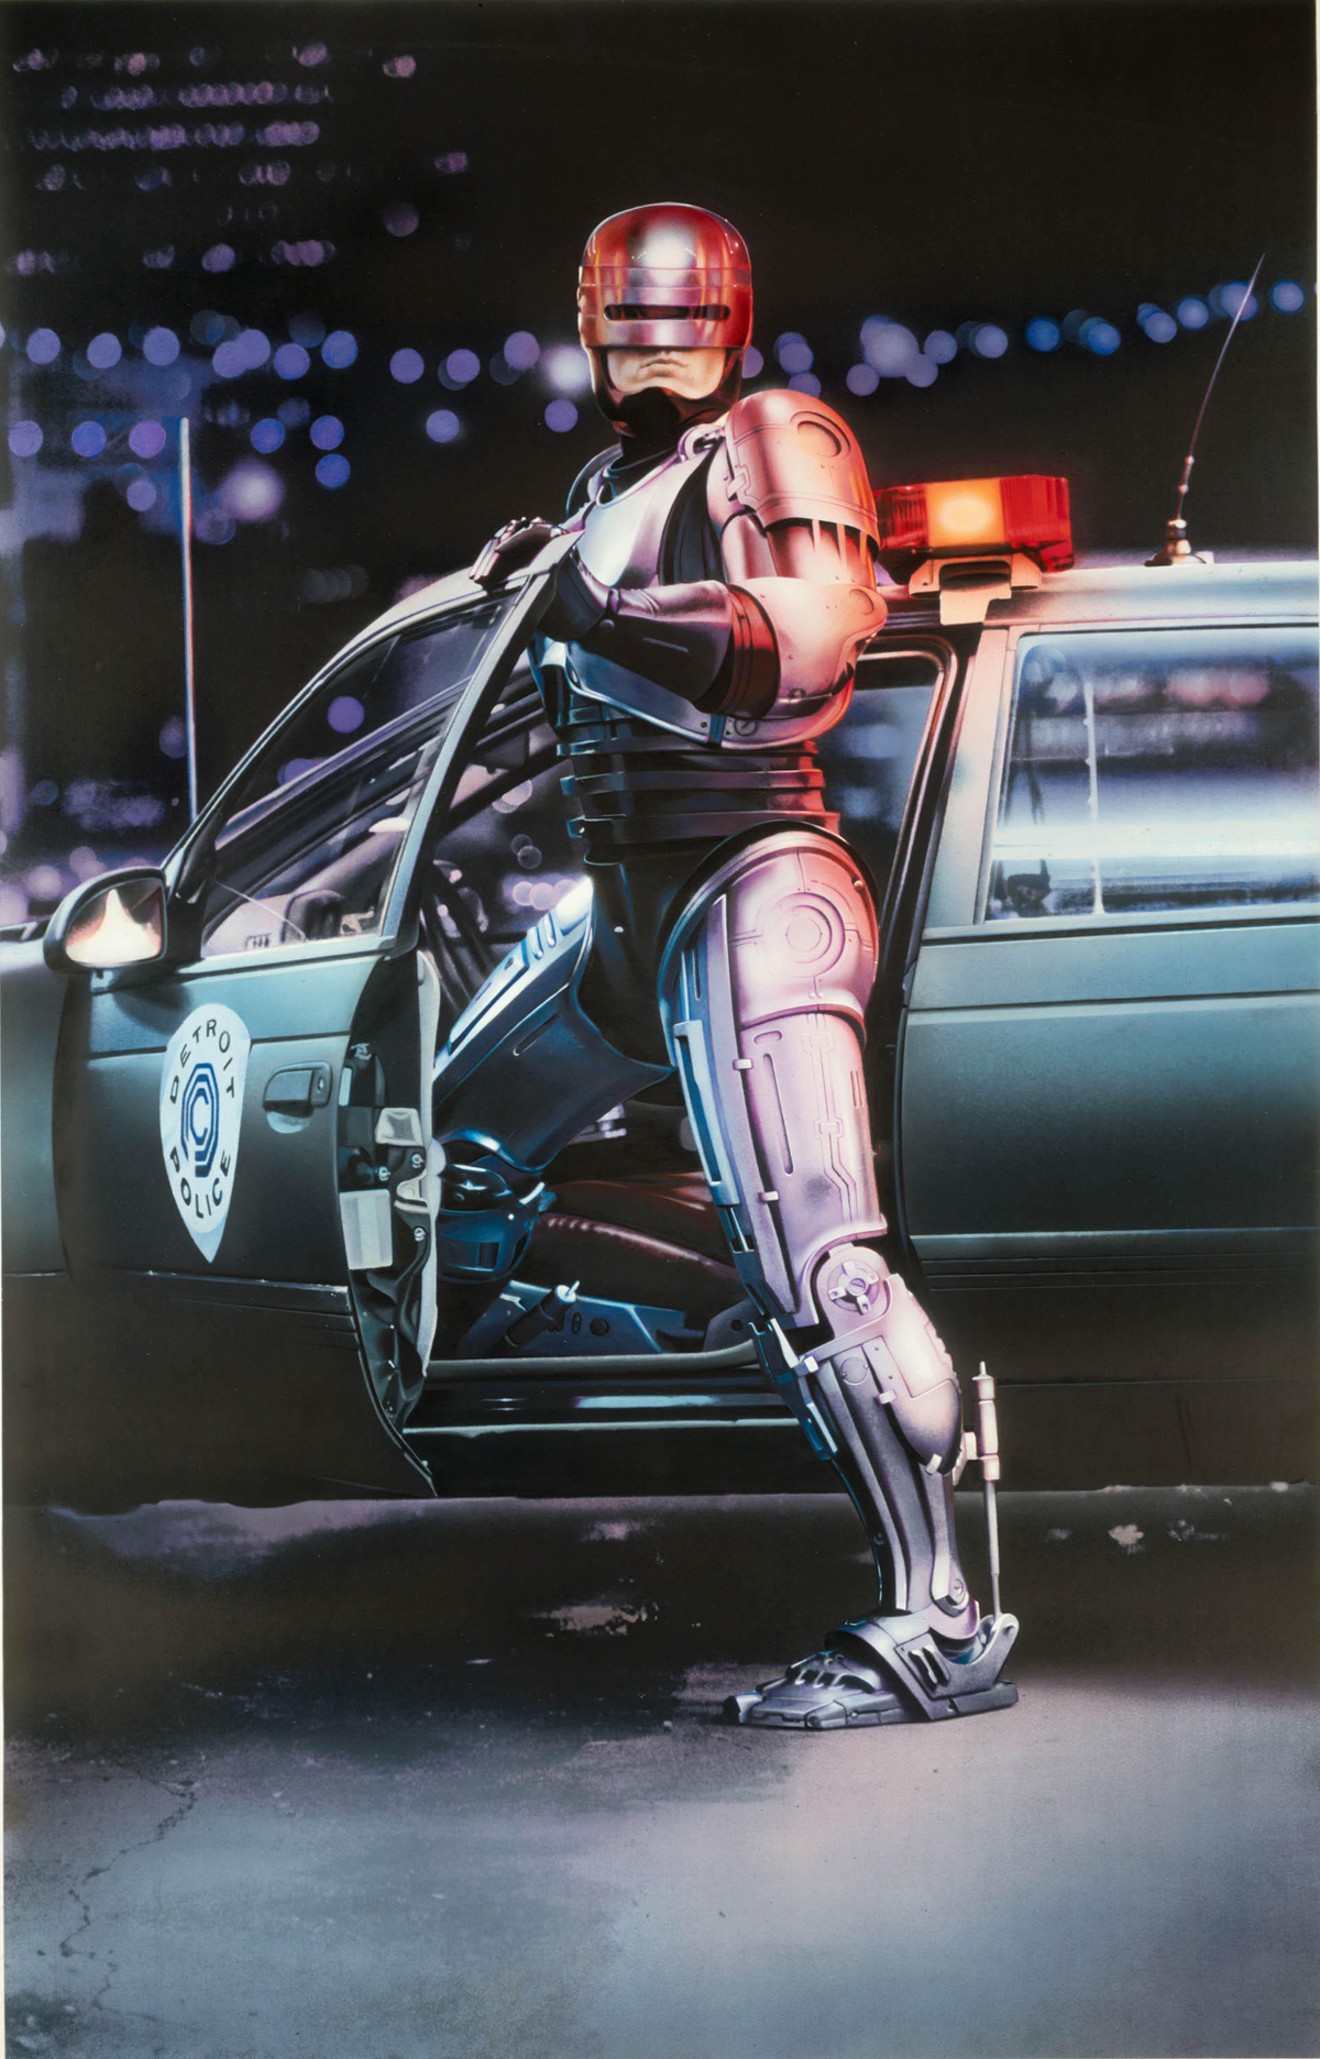 RoboCop, the image used for the original poster.